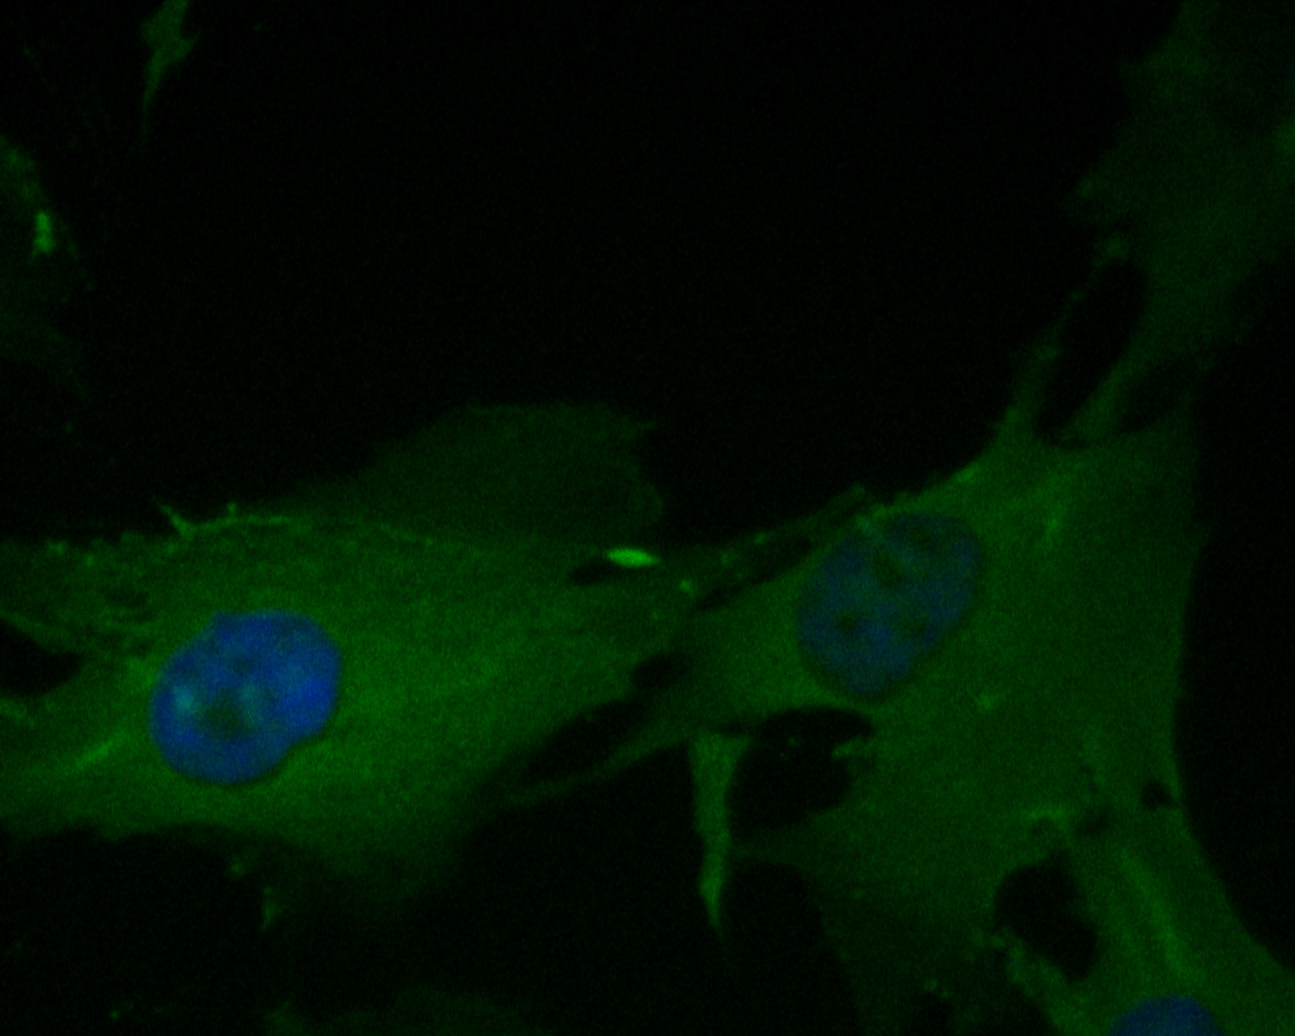 ICC staining of eIF3B in MG-63 cells (green). Formalin fixed cells were permeabilized with 0.1% Triton X-100 in TBS for 10 minutes at room temperature and blocked with 1% Blocker BSA for 15 minutes at room temperature. Cells were probed with the primary antibody (ET7110-36, 1/200) for 1 hour at room temperature, washed with PBS. Alexa Fluor®488 Goat anti-Rabbit IgG was used as the secondary antibody at 1/1,000 dilution. The nuclear counter stain is DAPI (blue).